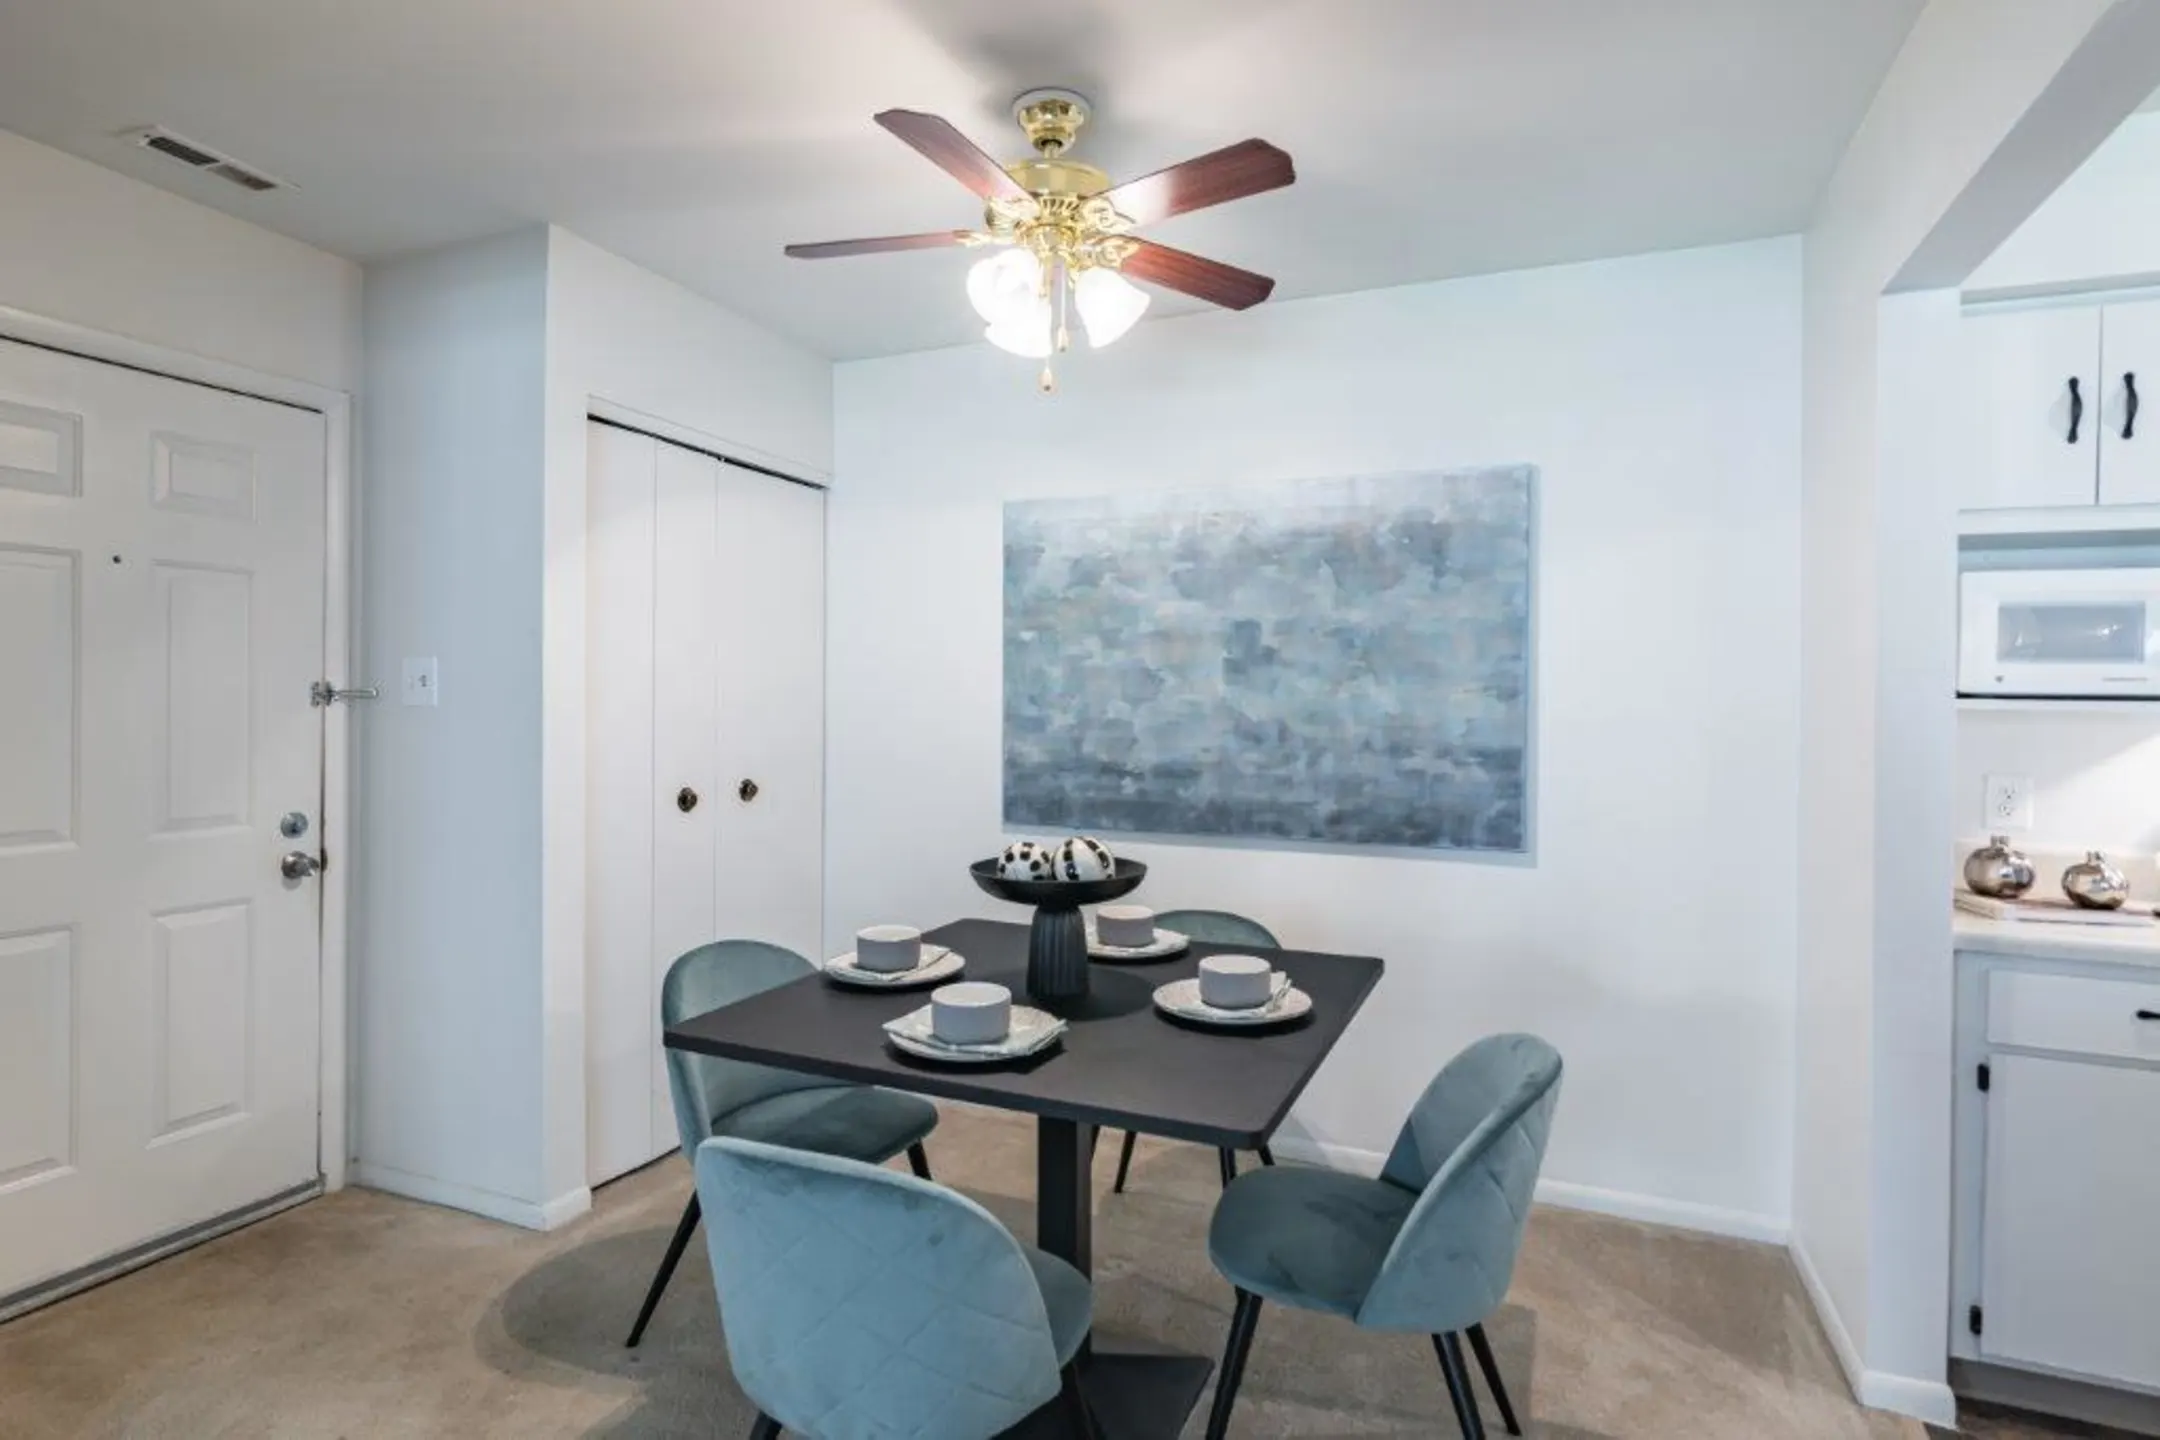 Dining Room - The Landings Apartment Homes - Absecon, NJ